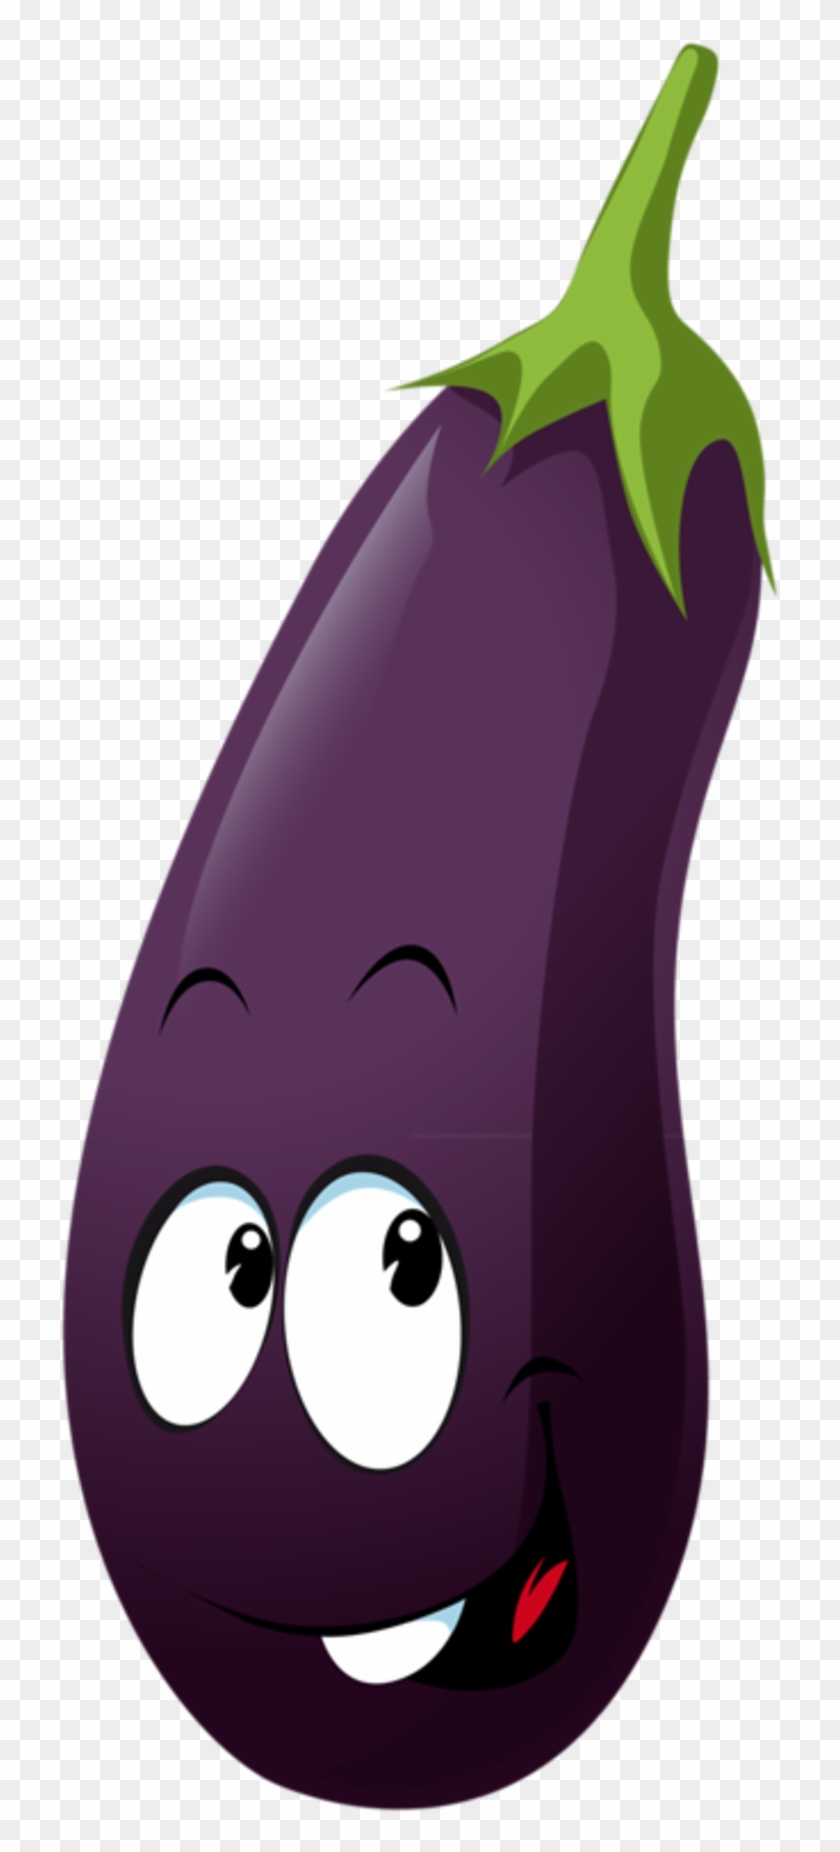 Svg Library Stock Individual Vegetable Free On - Eggplant Cartoon Png Clipart #425363